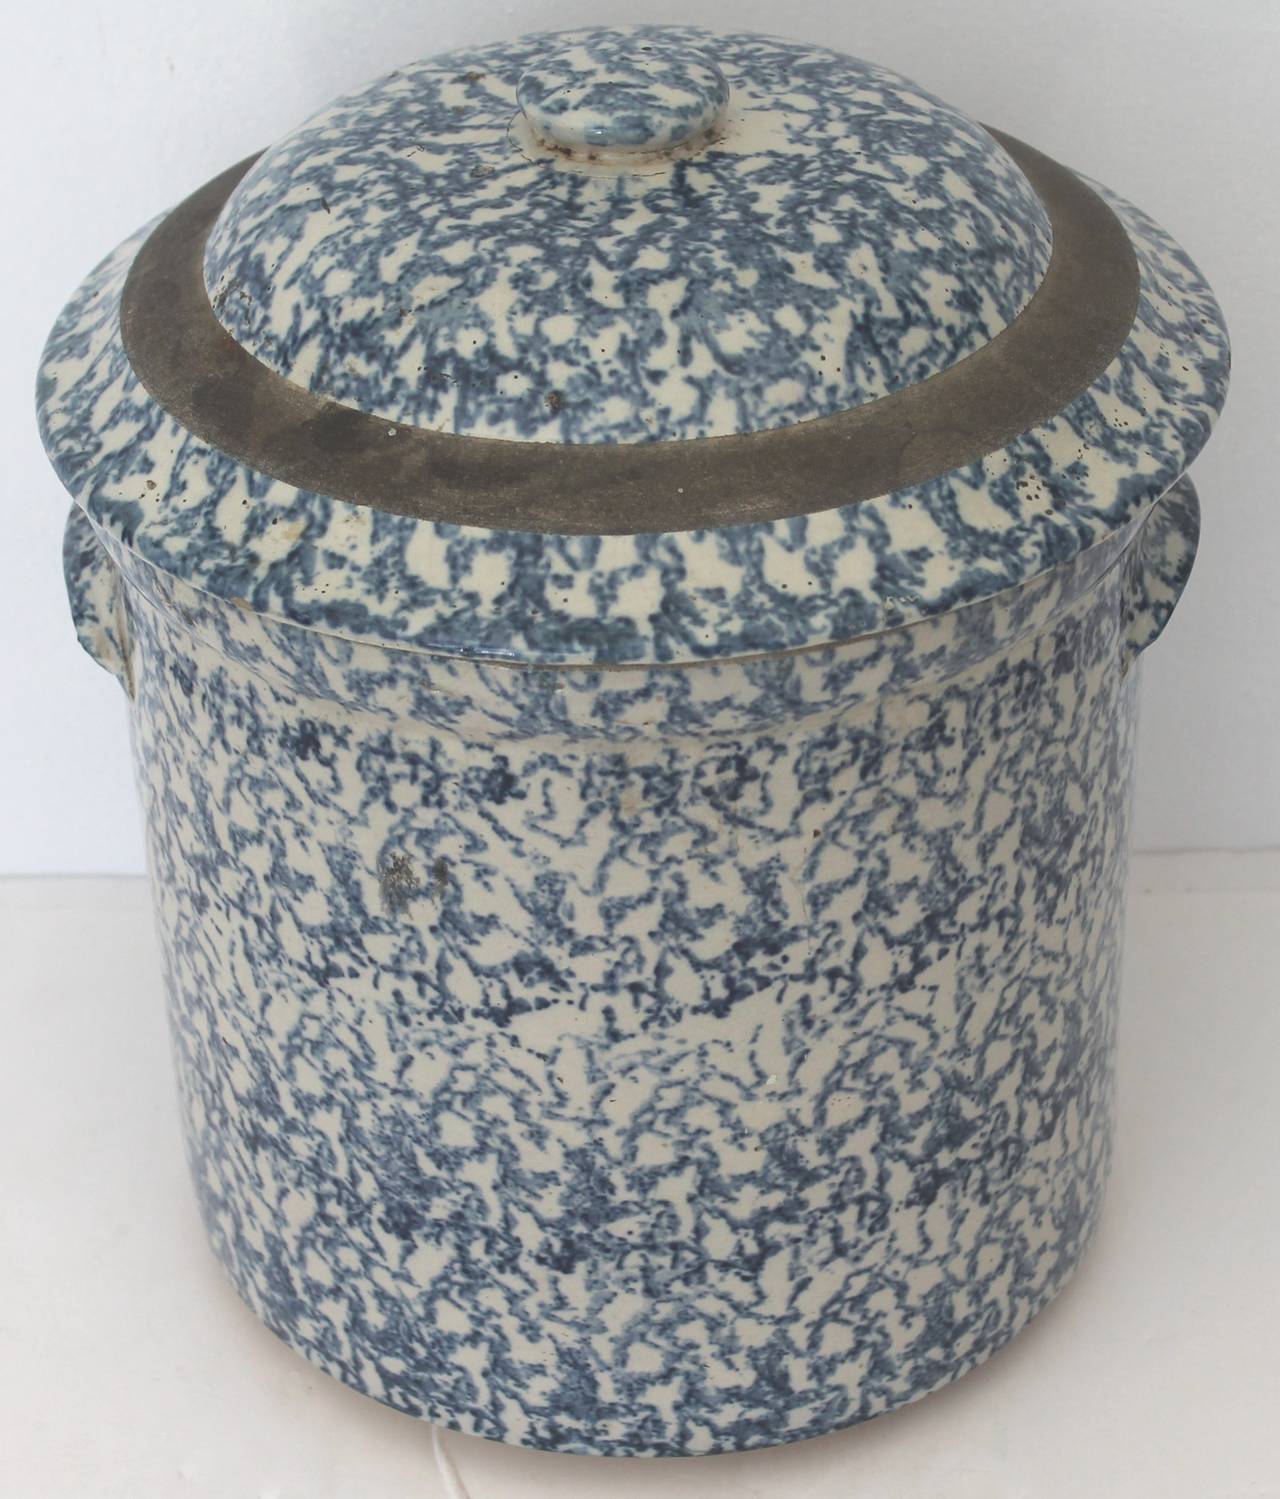 Hand-Painted Rare 19th Century Two-Piece Sponge Ware Water Cooler For Sale